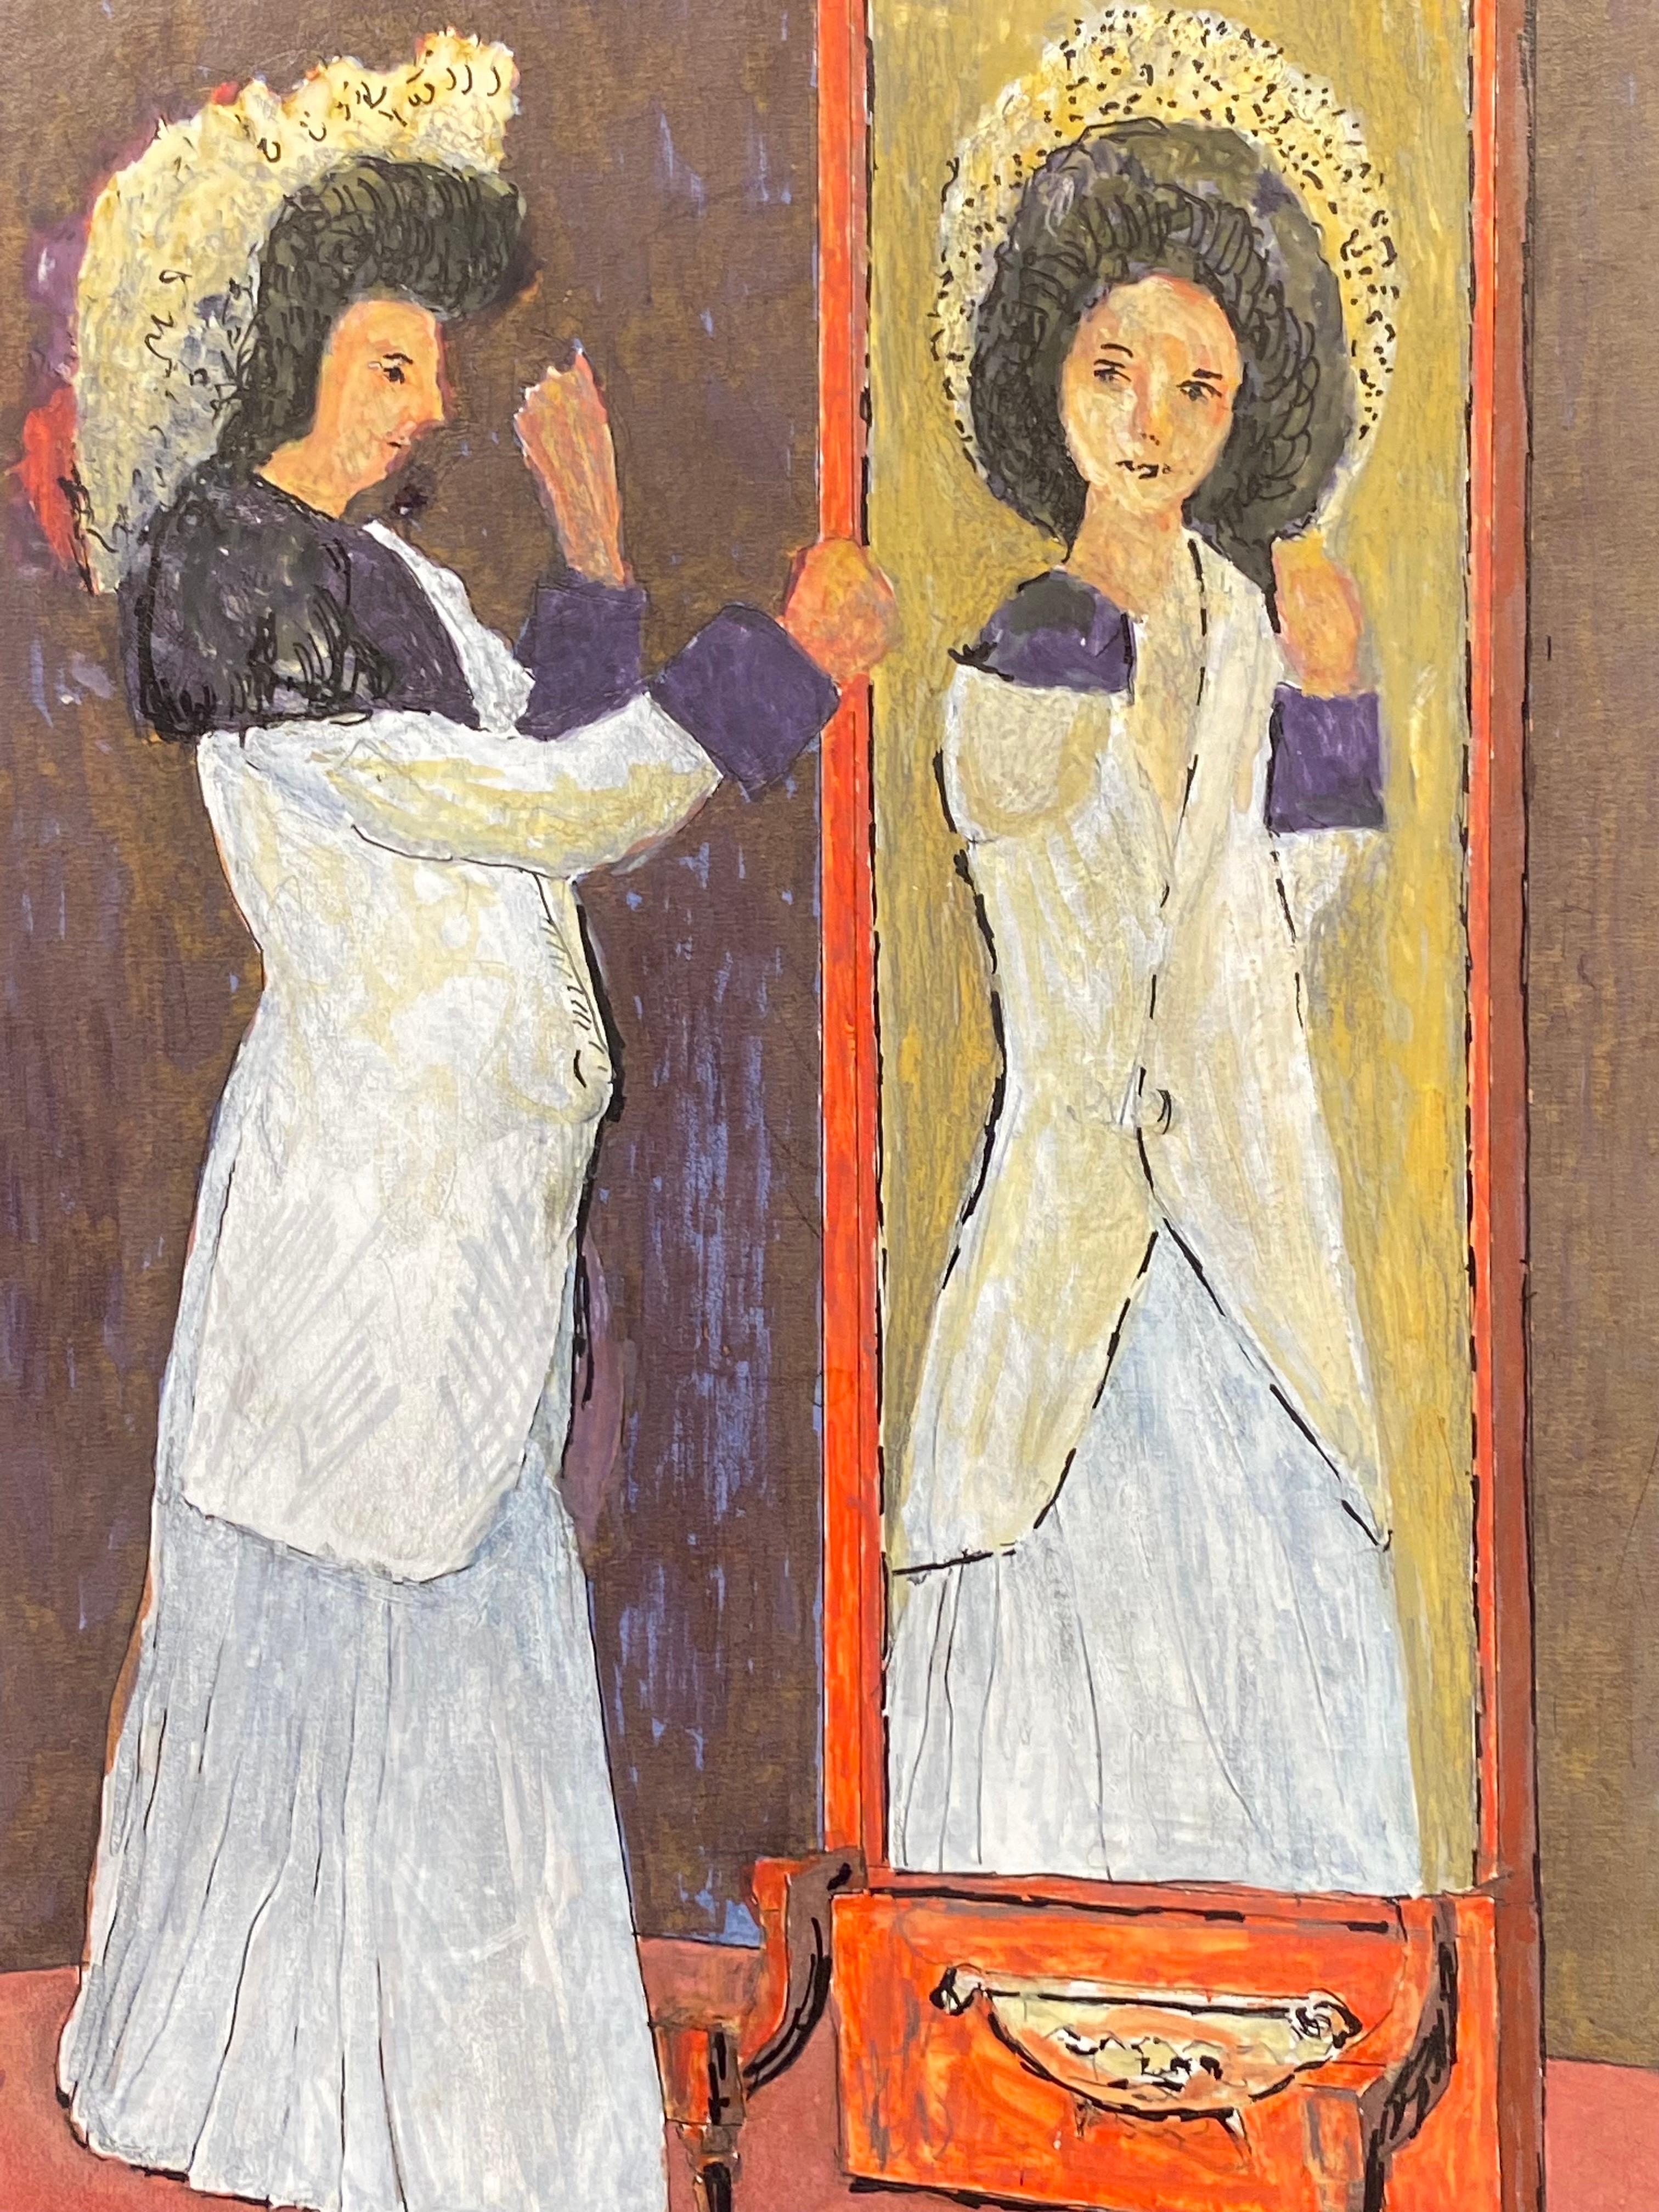 Mirror Reflection
by Bernard Labbe (French mid 20th century), stamped verso
original gouache/watercolour painting on board
overall size: 11 x 8 inches
condition: very good and ready to be enjoyed. 

provenance: the artists atelier/ studio, France